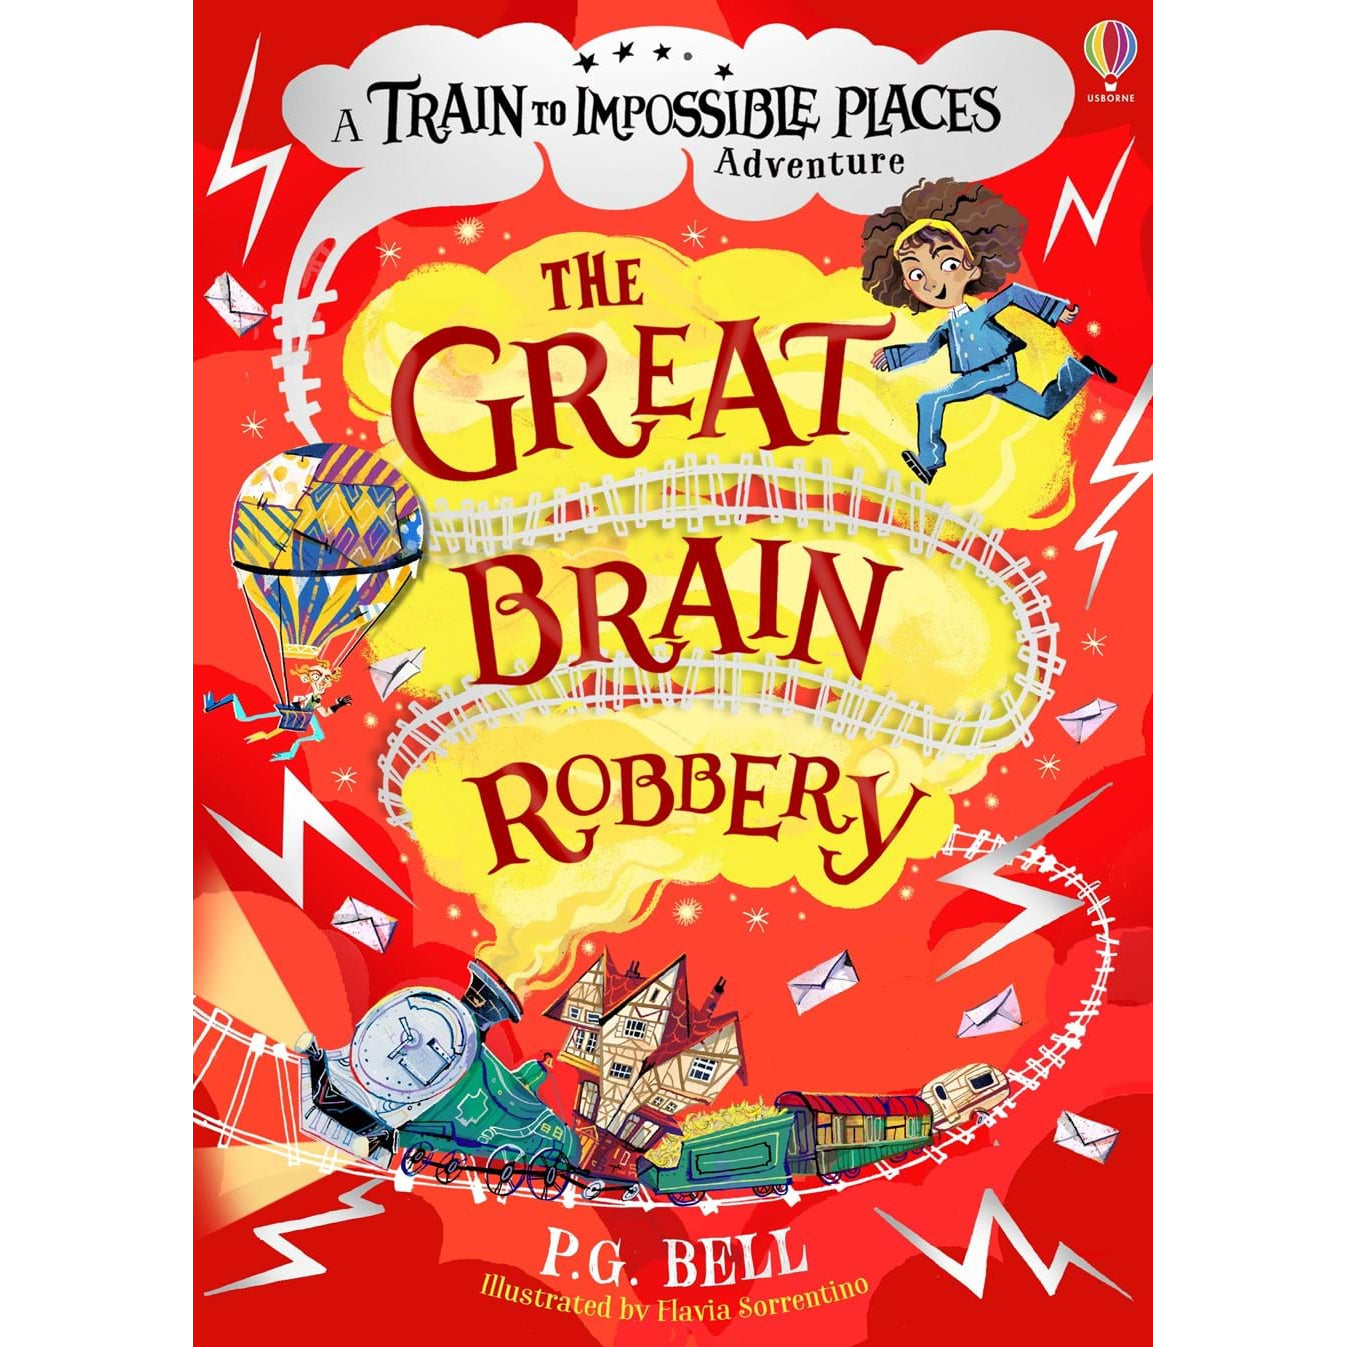 Red front cover of book with The Great Brain Robbery written in red in yellow steam from green steam engine with train track and lightening. By P G Bell.